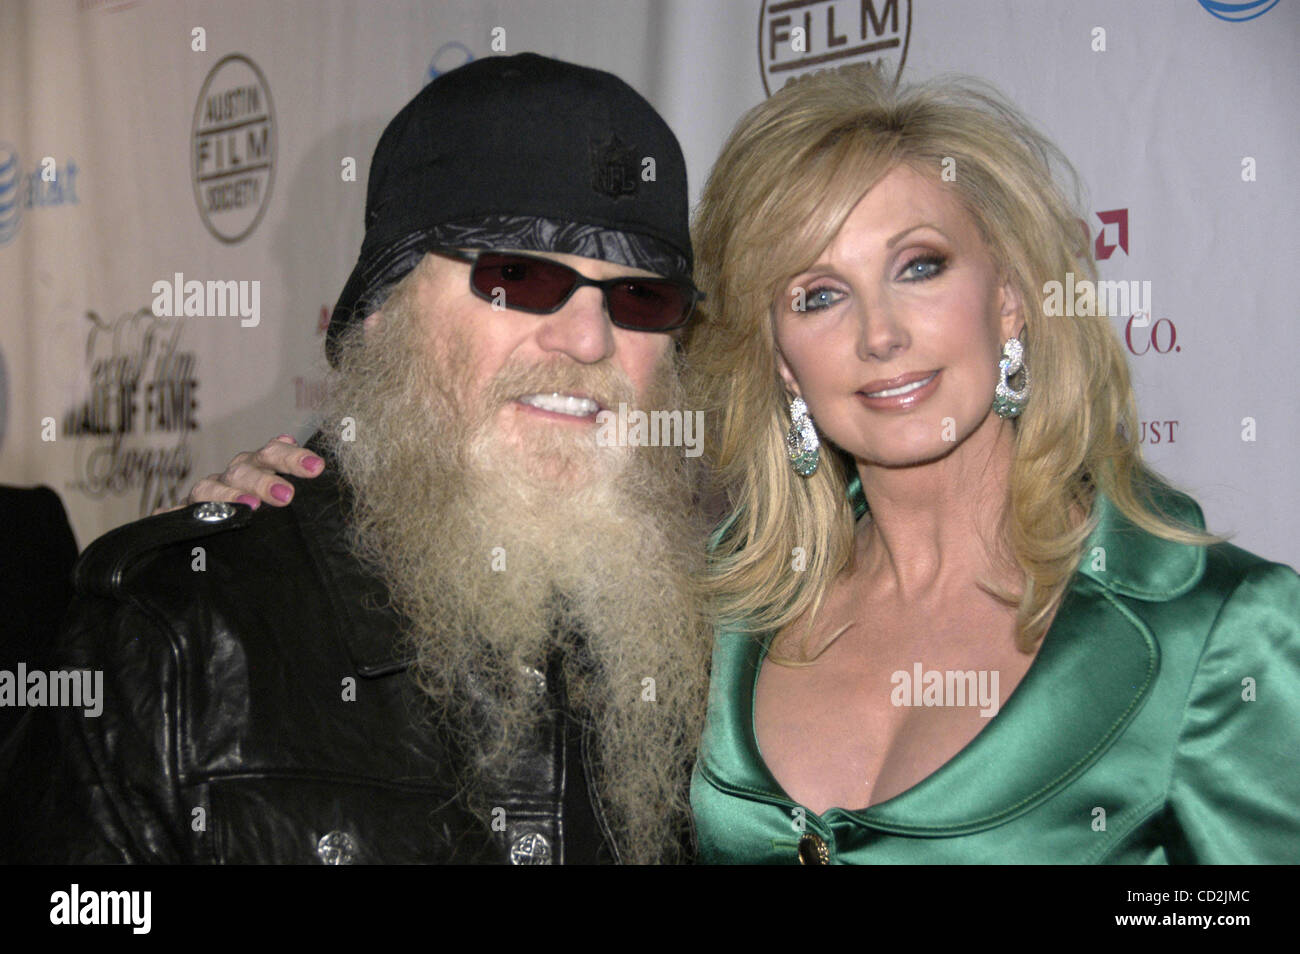 Mar 07, 2008 - Austin, Texas, USA - Honorees DUSTY HILL of ZZ Top & MORGAN FAIRCHILD at the Texas Film Hall Of Fame 2008 sponsored by the Austin Film Society. (Credit Image: Stock Photo